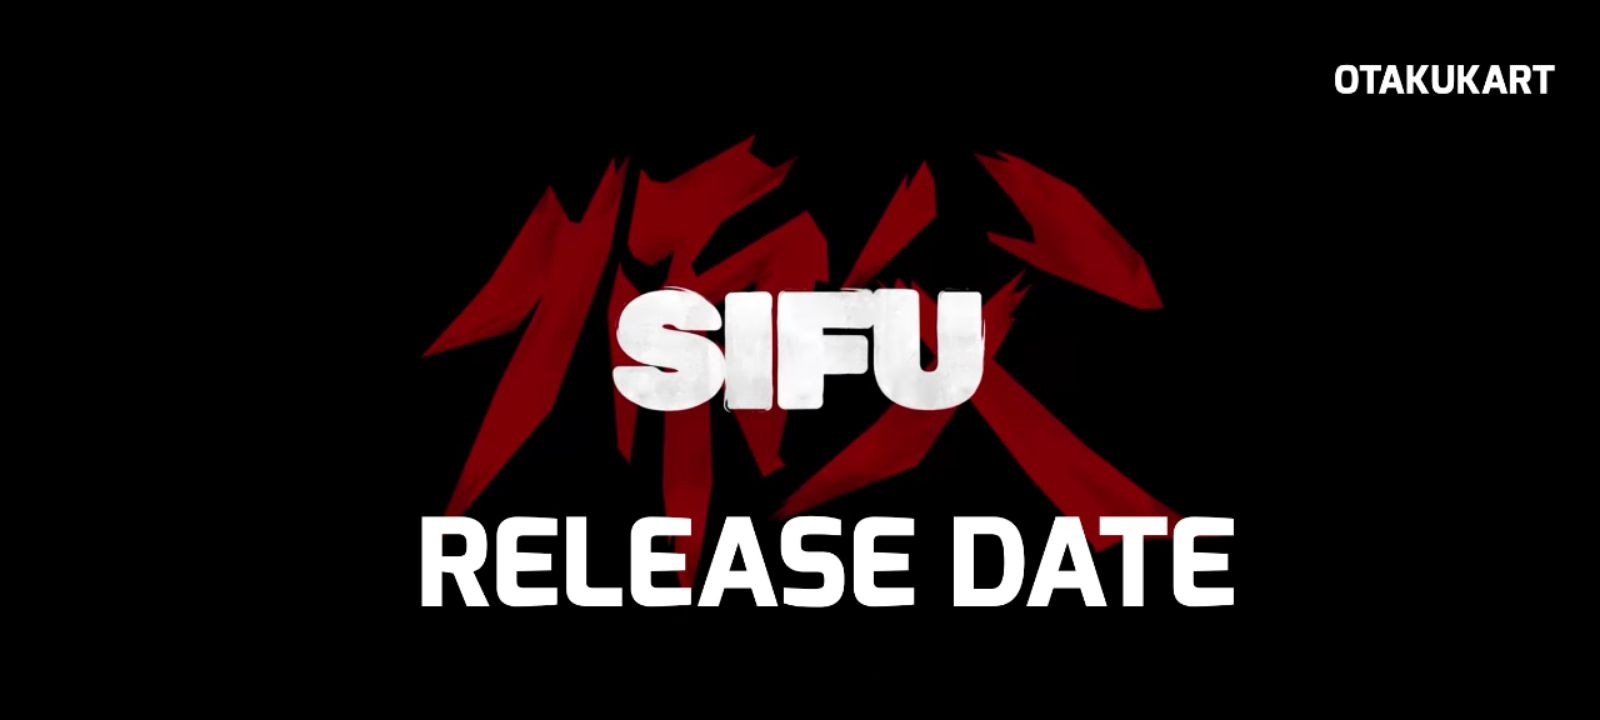 Sifu release date and System requirements